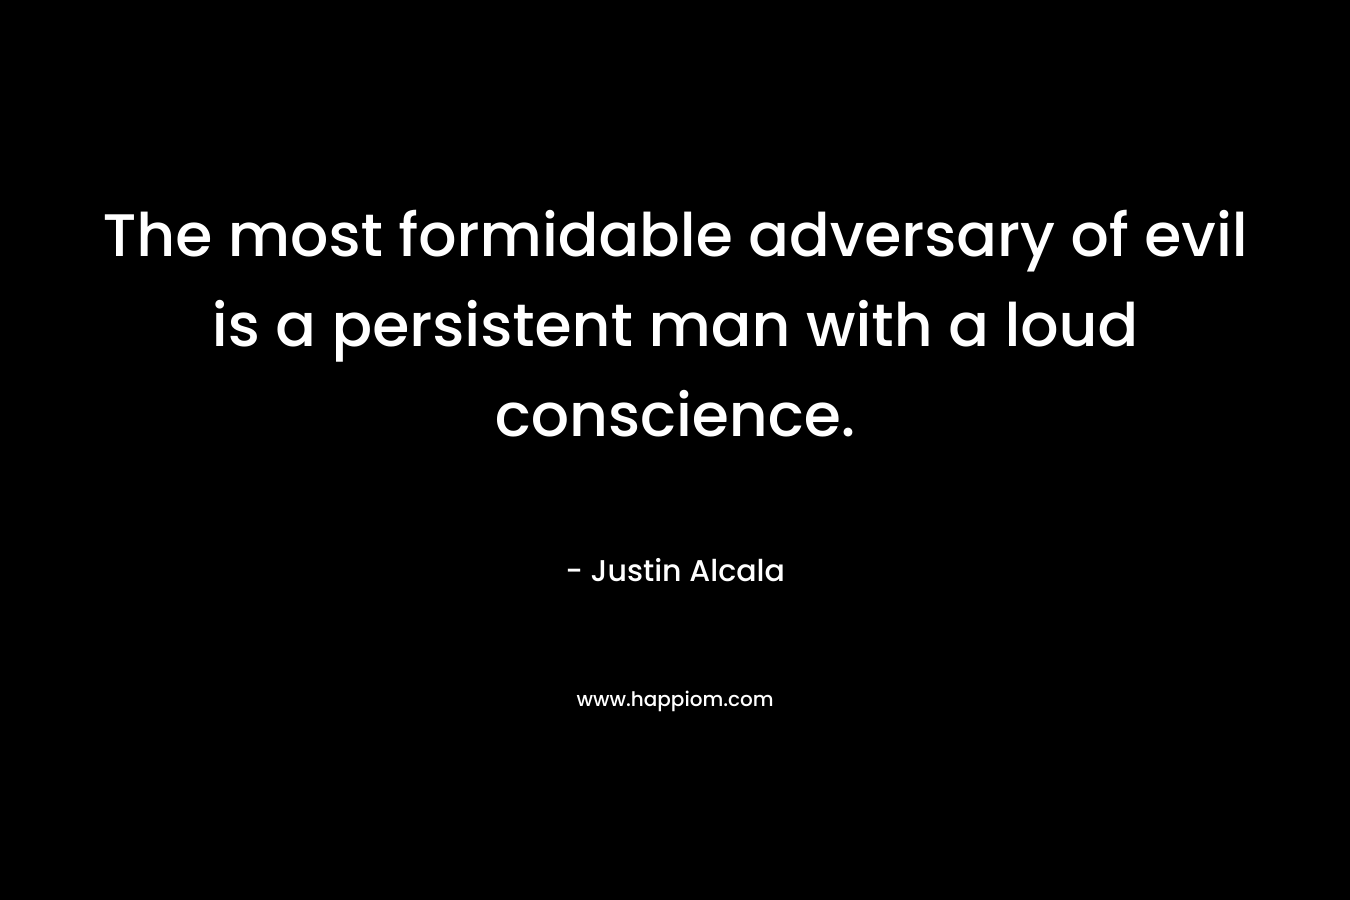 The most formidable adversary of evil is a persistent man with a loud conscience.